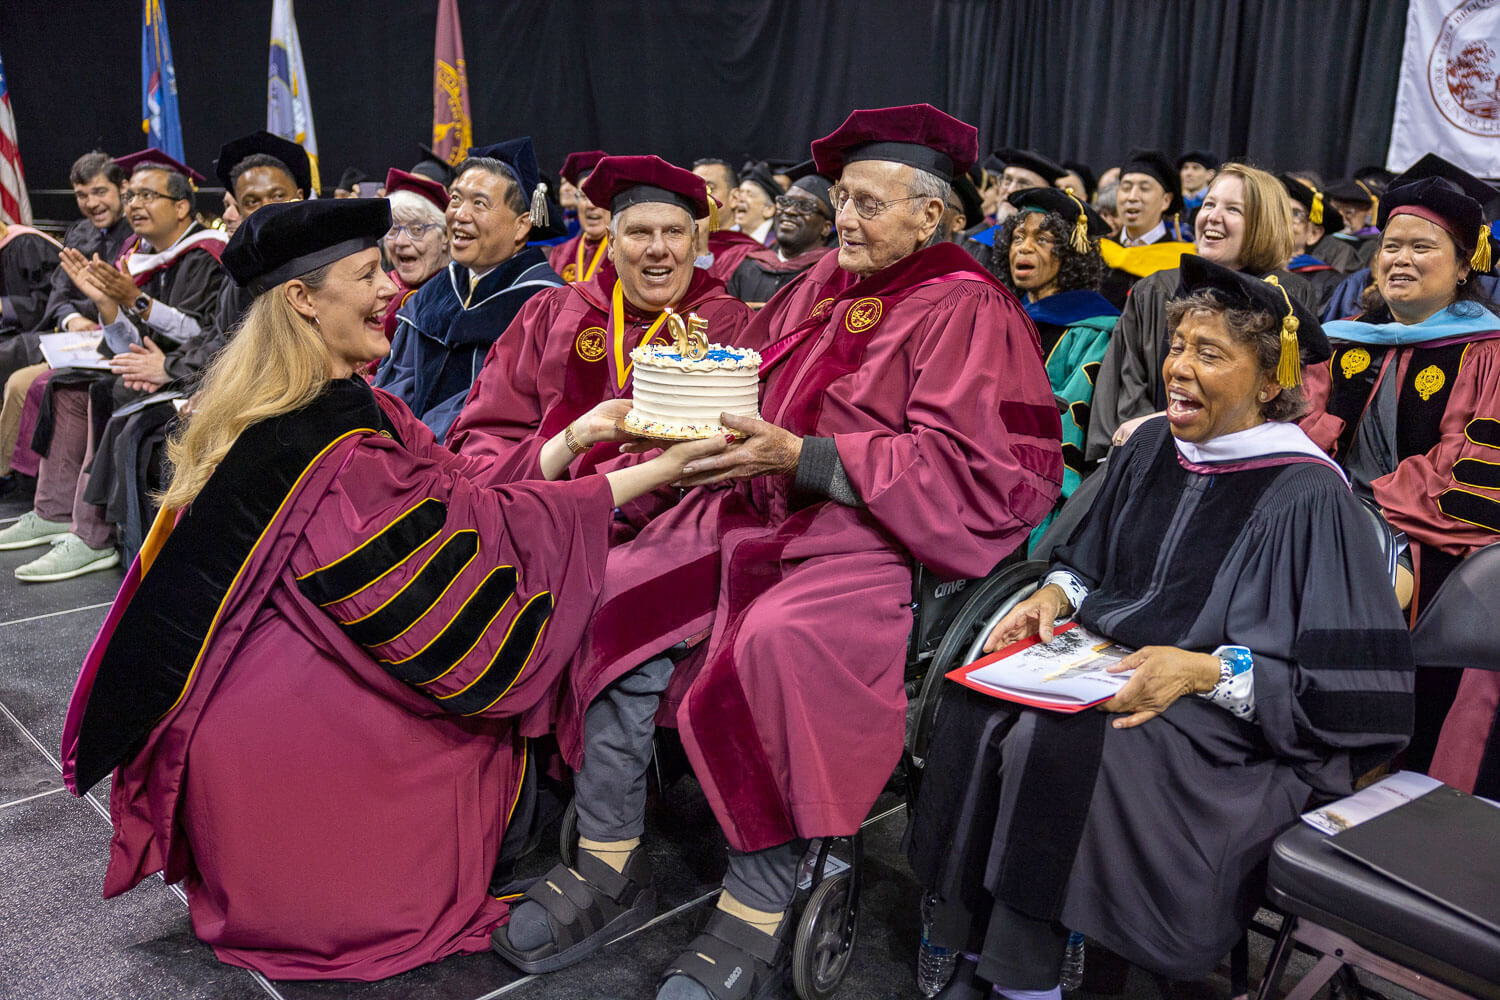 President Michelle J. Anderson presents Leonard Tow ’50 with a birthday cake.